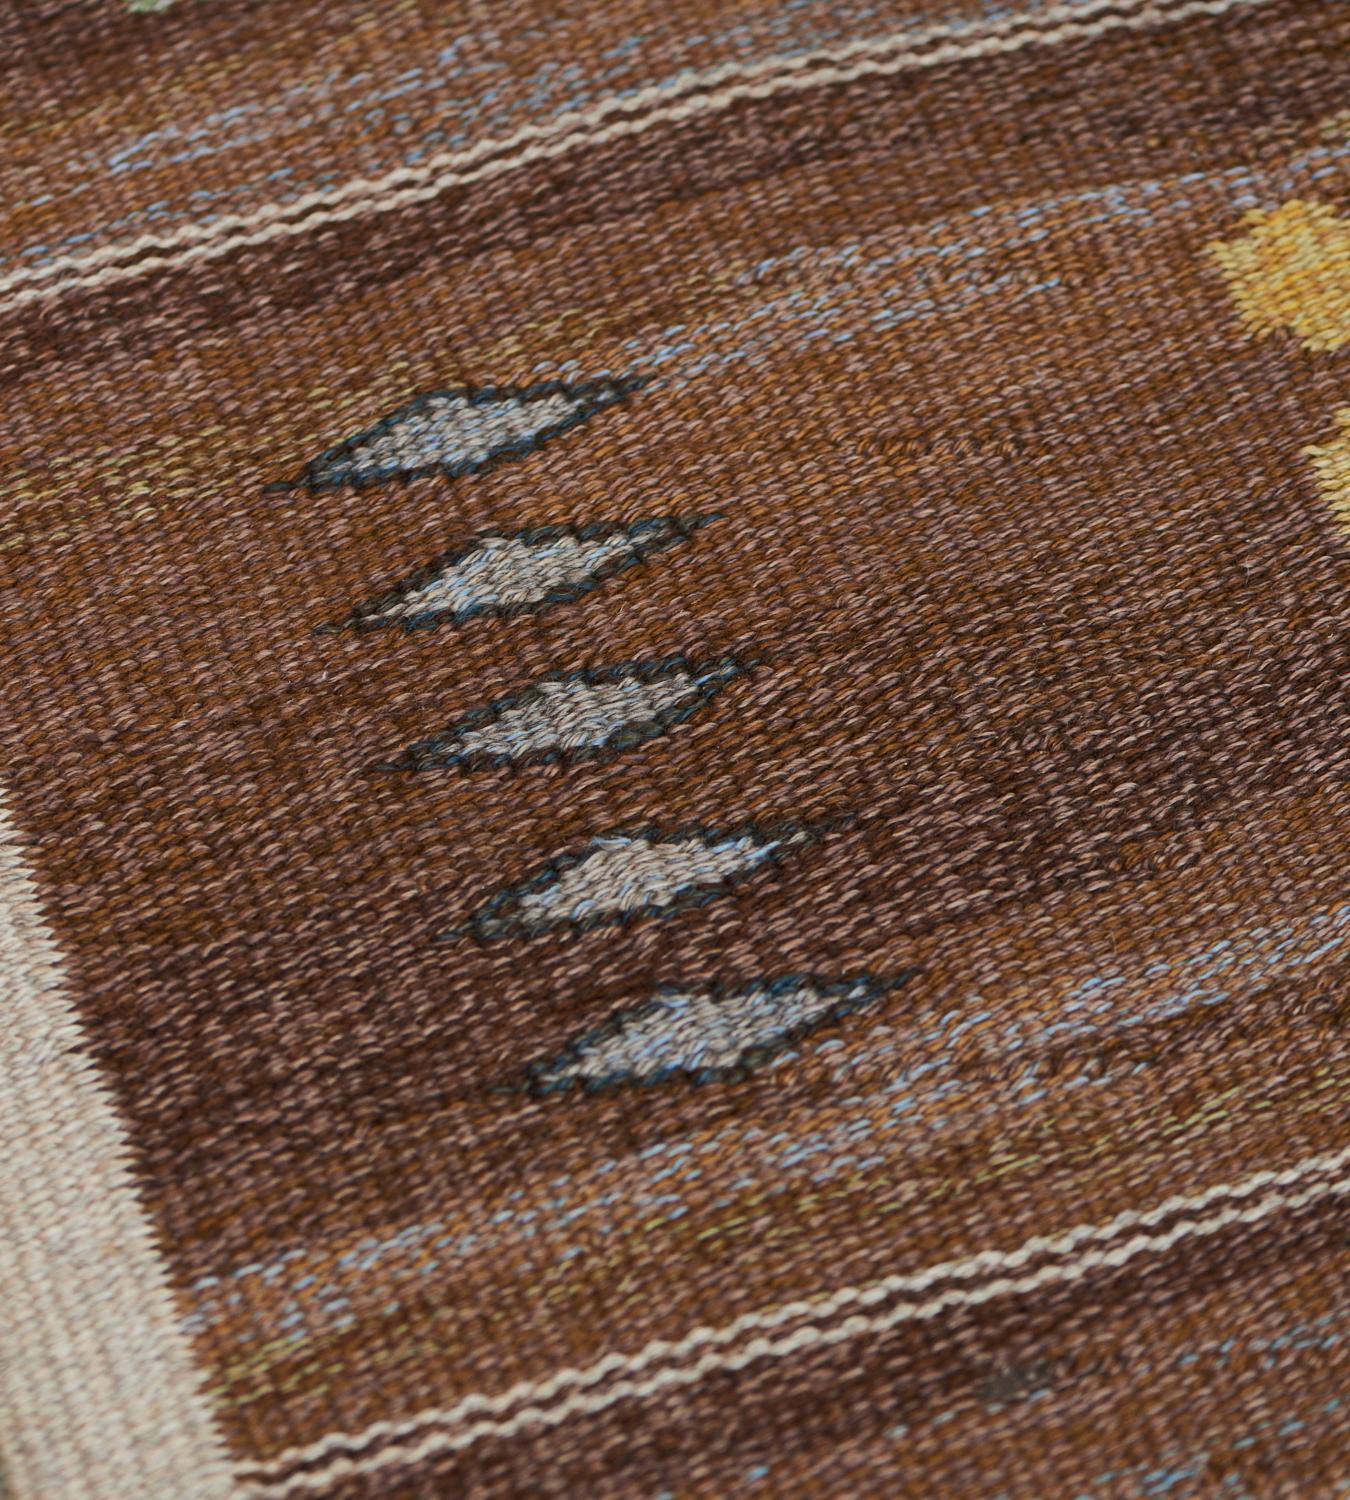 This mid-century handwoven Swedish flatweave Rölakan rug has a shaded caramel-brown field with seven broad horizontal panels each containing polychrome dice motifs and diamond lozenges around a large ivory I-shaped motif with a striped brown and